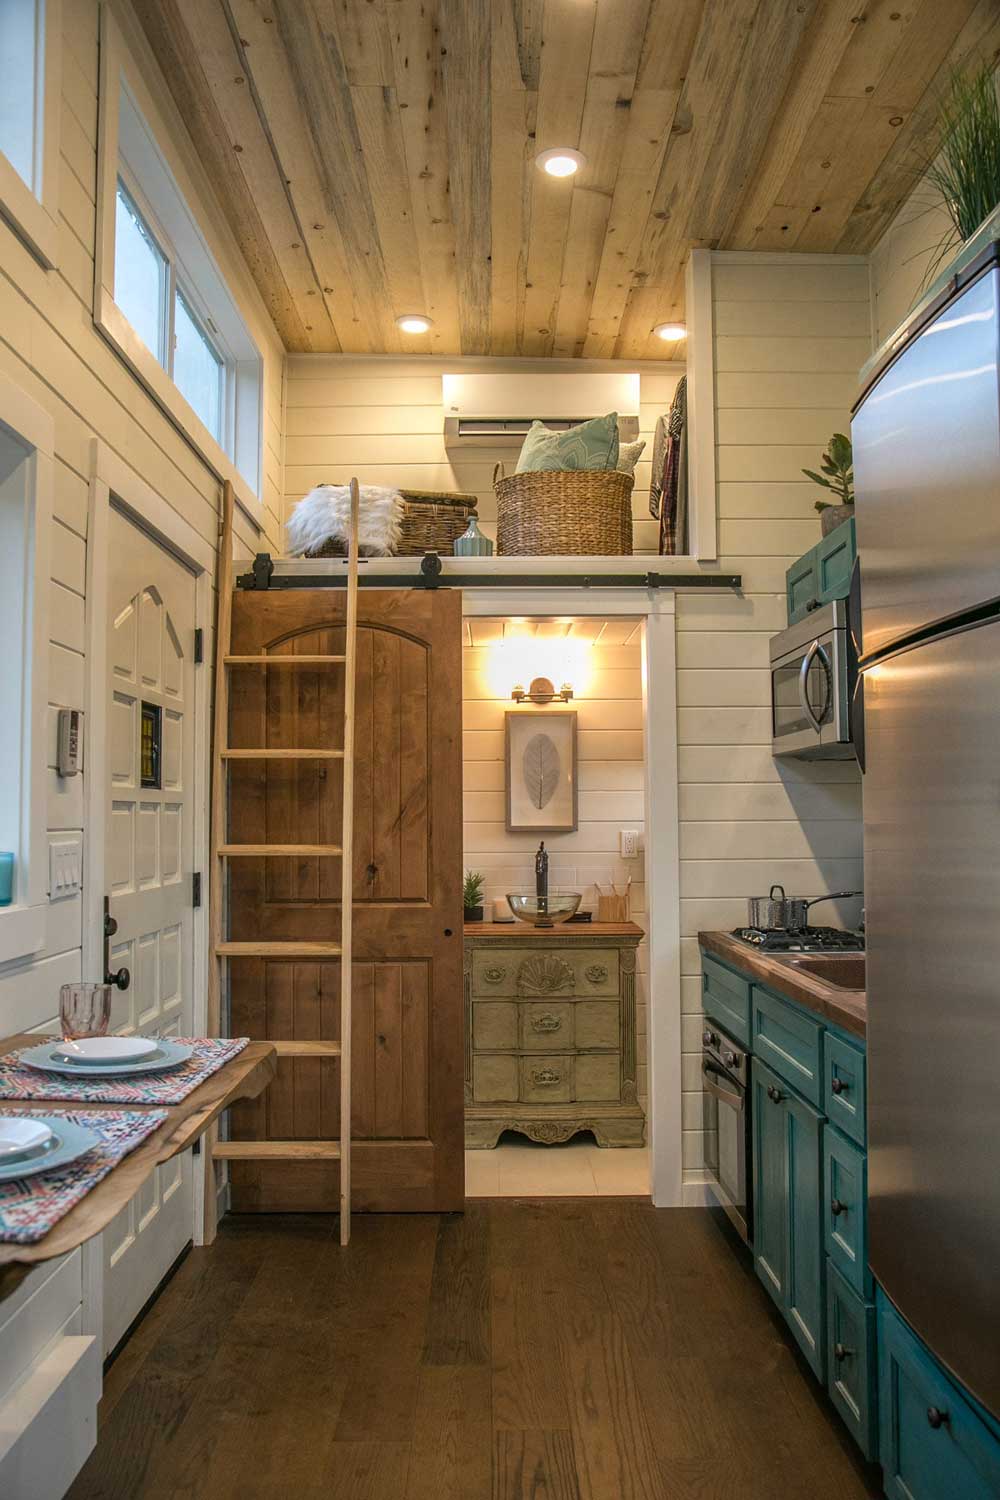 Interior of The Archway custom tiny house showing ladder and loft, bathroom, kitchen and dining counter